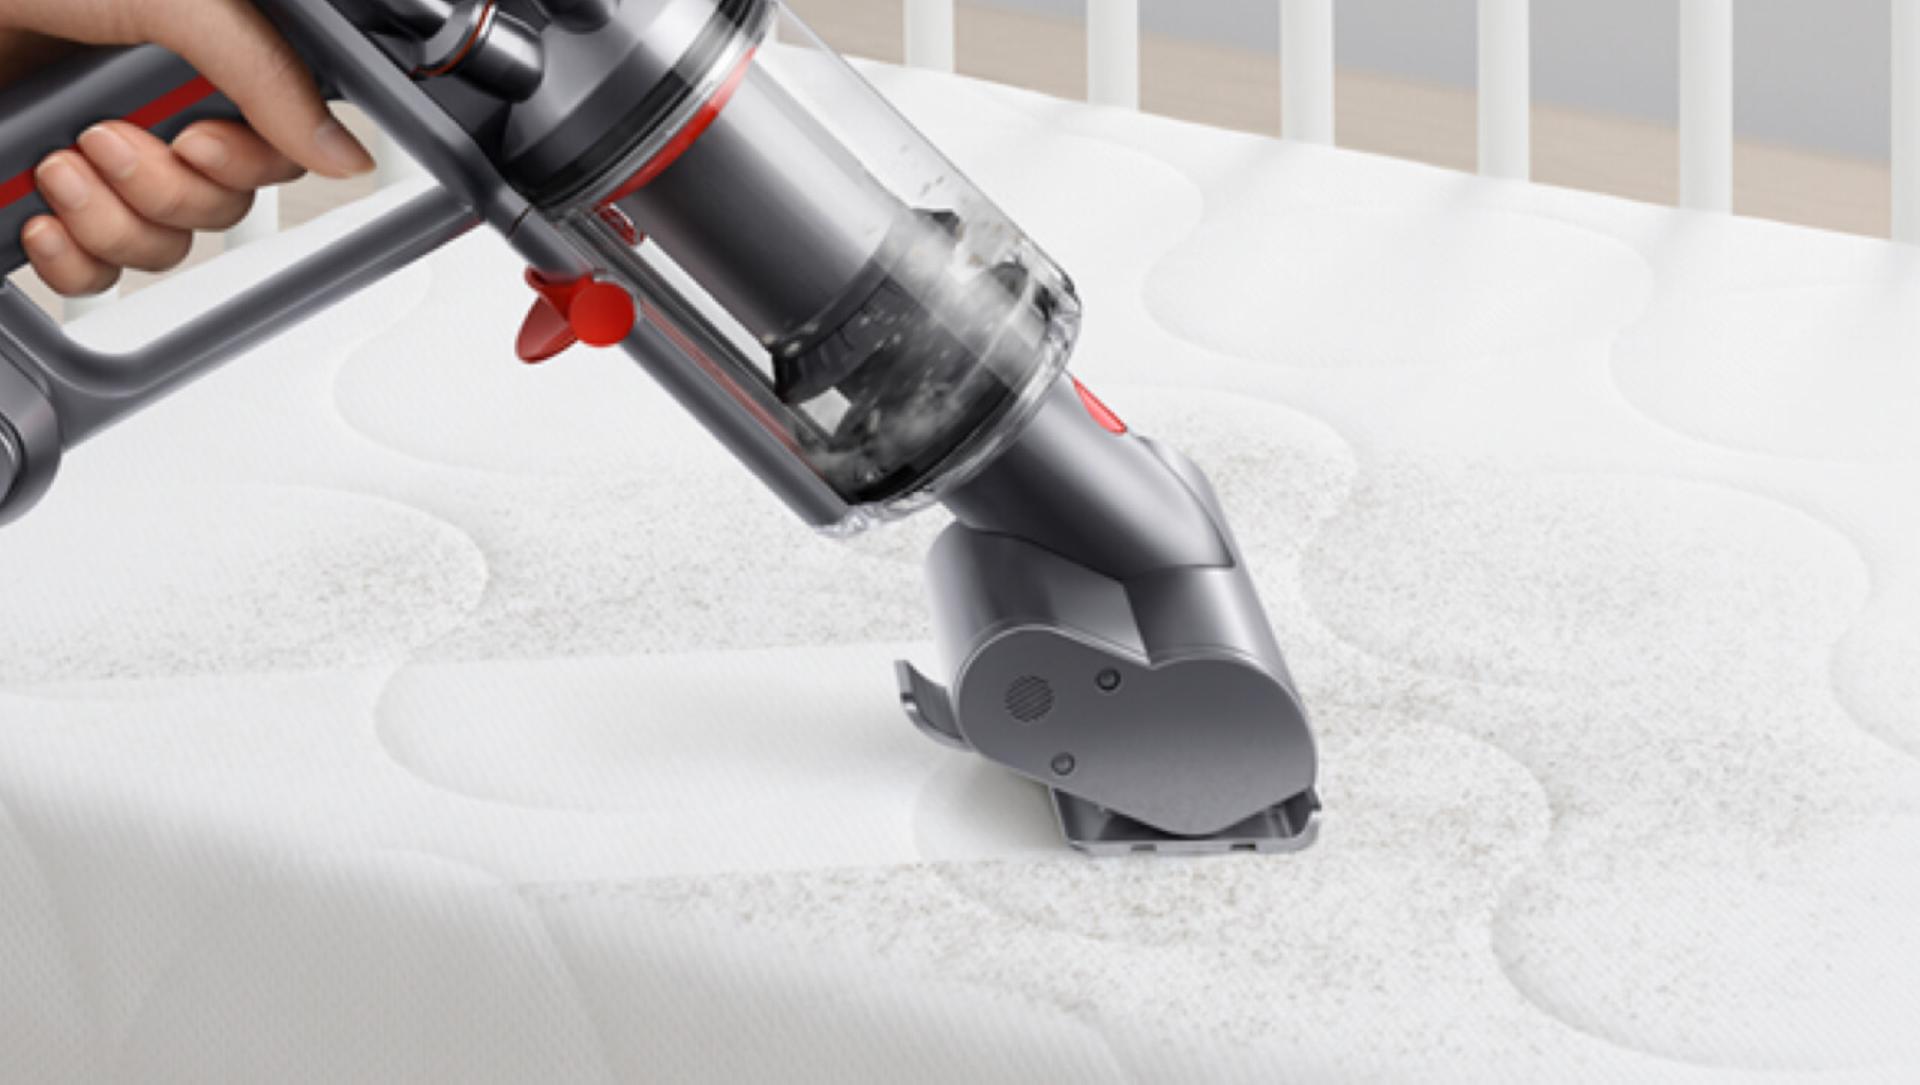 Dyson Micro 1.5kg™ vacuum cleaning a mattress